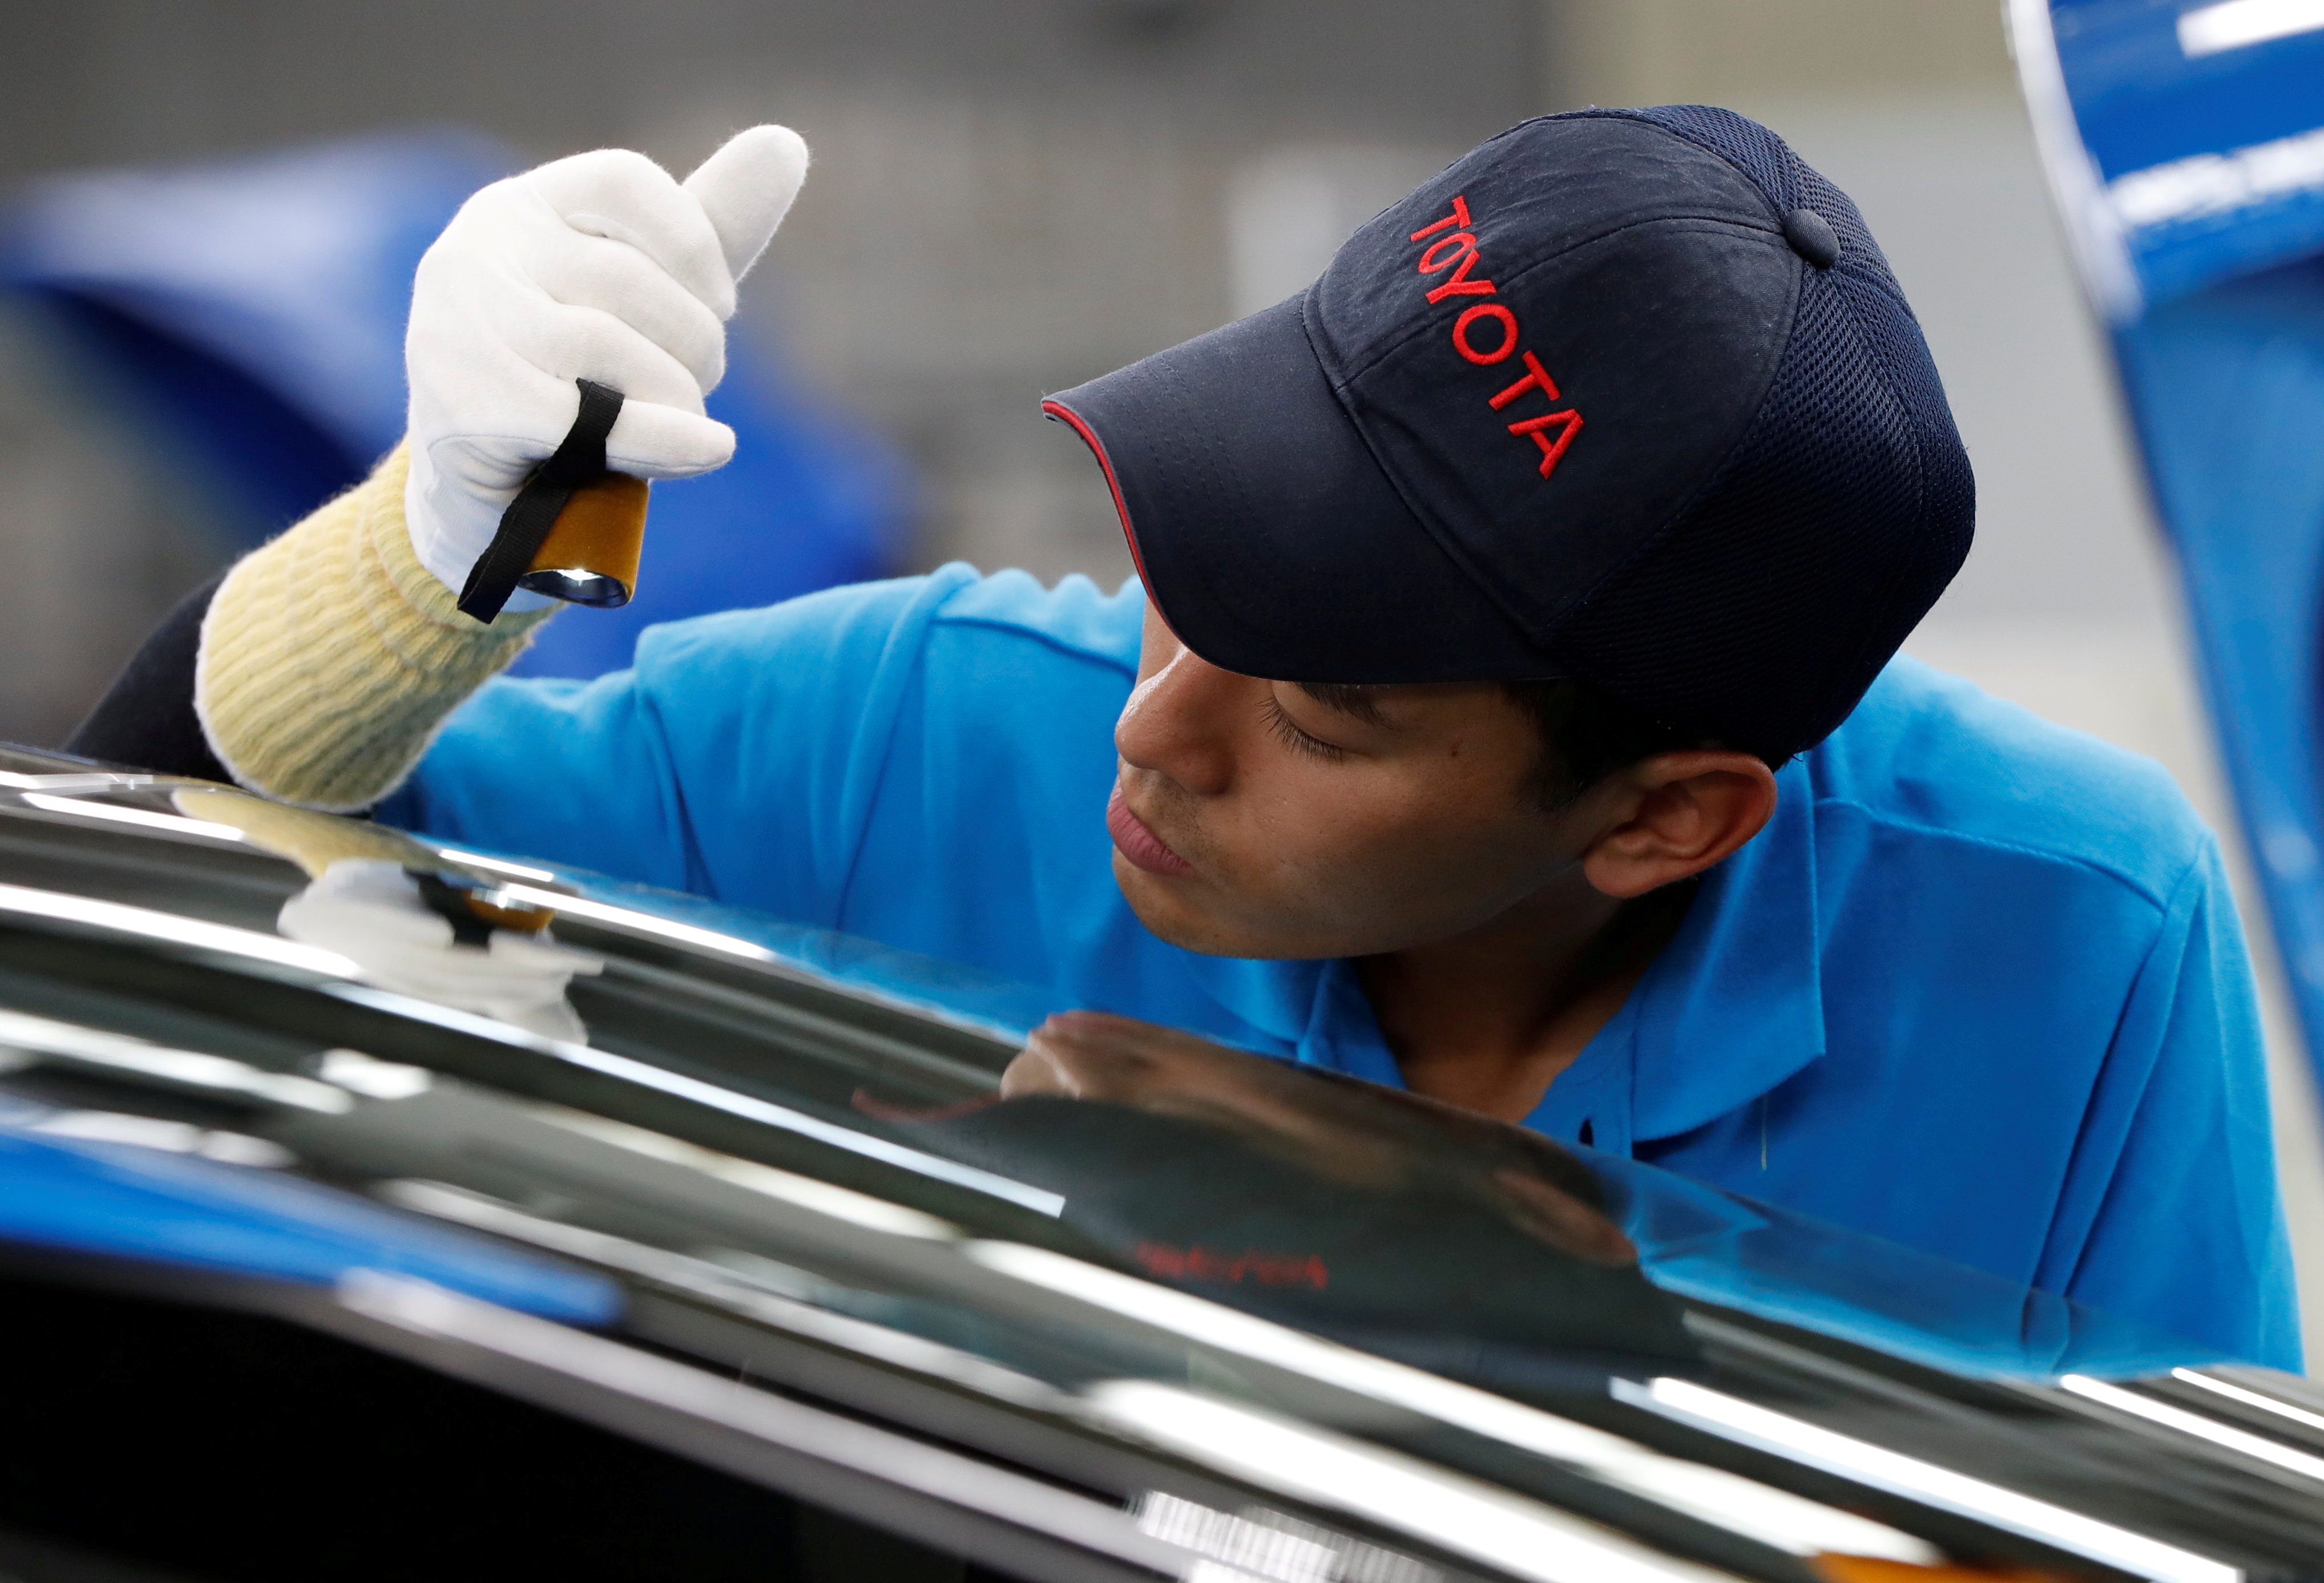 An employee of Toyota Motor Corp. works on the assembly line of Mirai fuel cell vehicle (FCV) at the company's Motomachi plant in Toyota, Aichi prefecture, Japan May 17, 2018. Picture taken May 17, 2018.  REUTERS/Issei Kato/File Photo